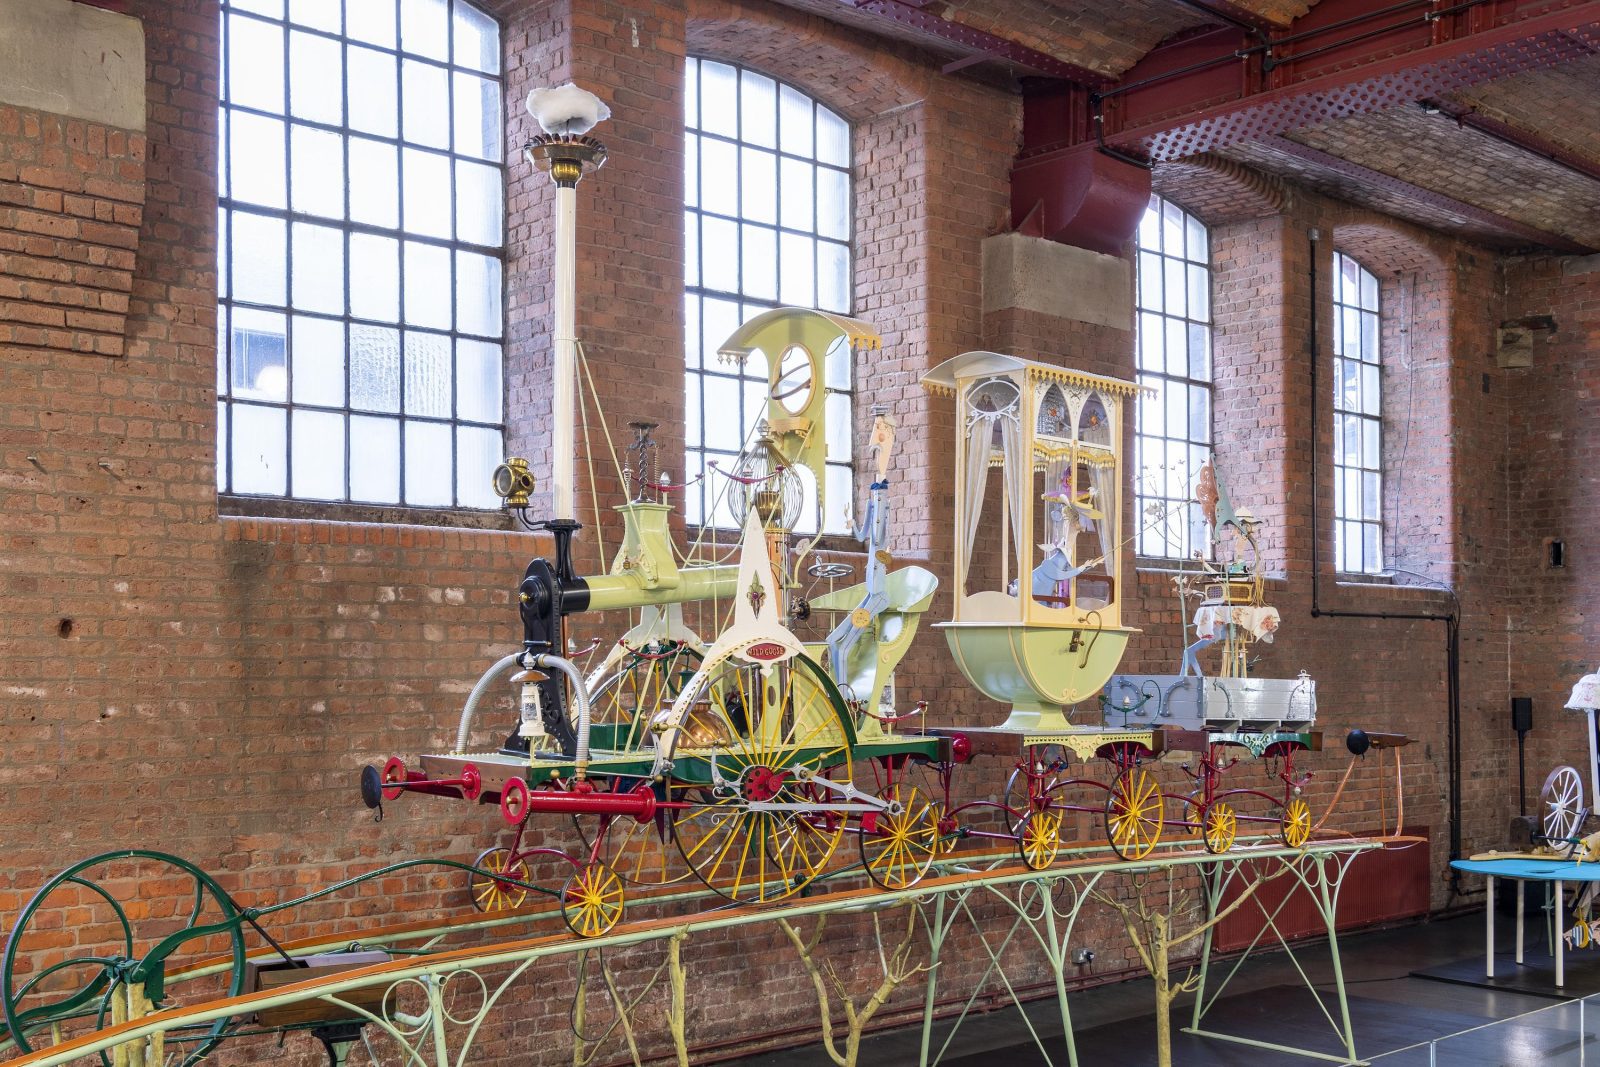 There&#8217;s exhibitions, experiments, and more at the Science and Industry Museum this half term, The Manc